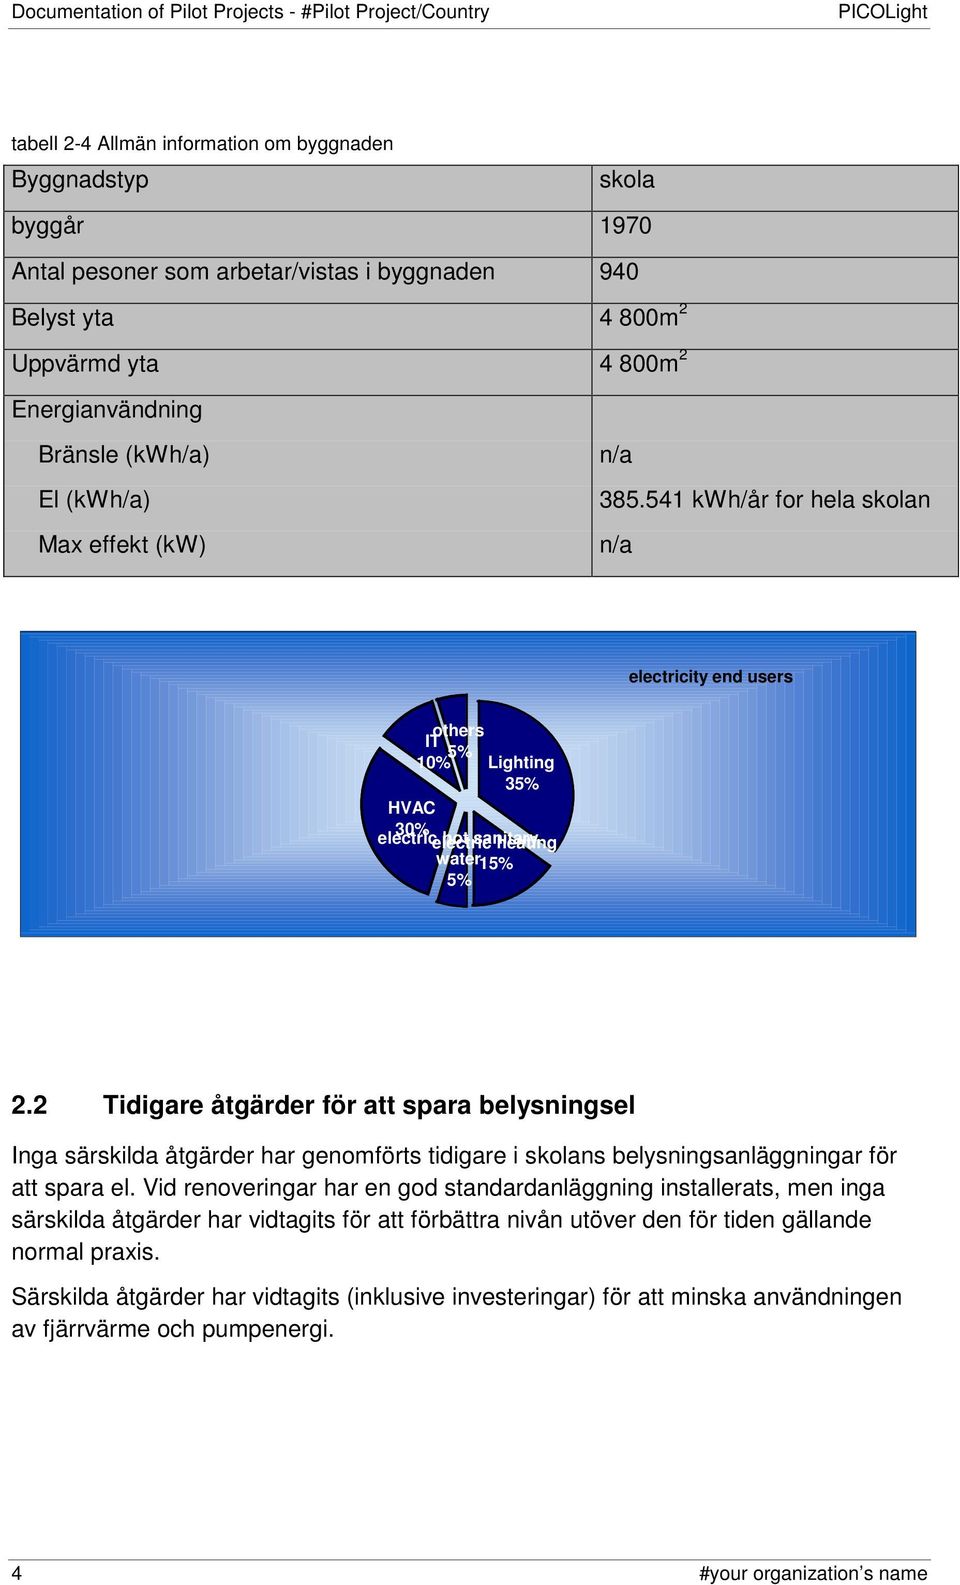 541 kwh/år for hela skolan n/a electricity end users others IT 5% 10% Lighting 35% HVAC 30% electric electric hot sanitary heating water15% 5% 2.